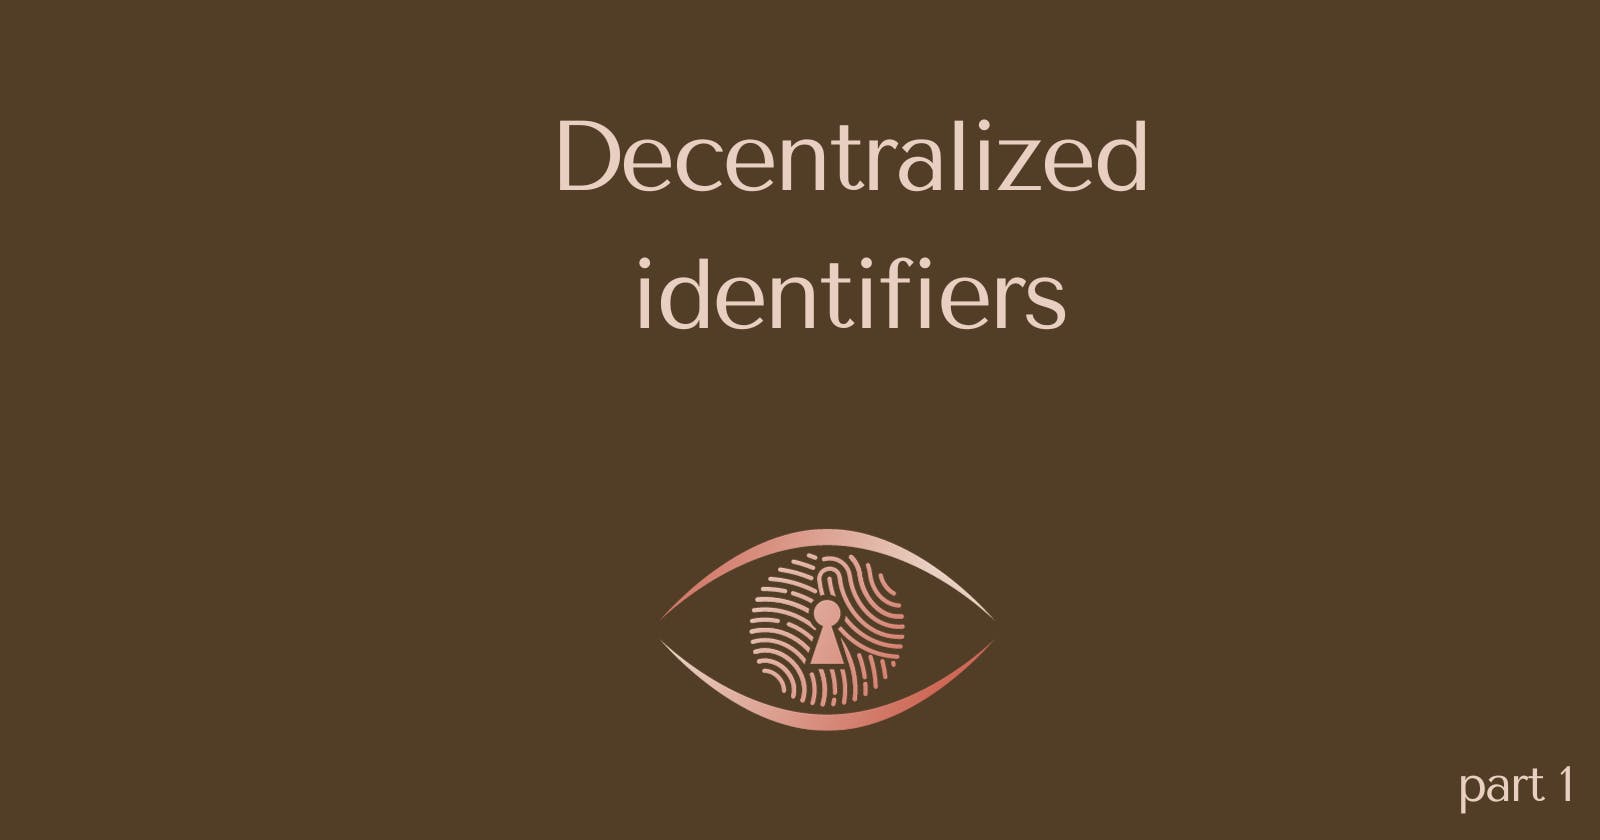 Decentralized Identifiers: Challenges with Current Identity Systems